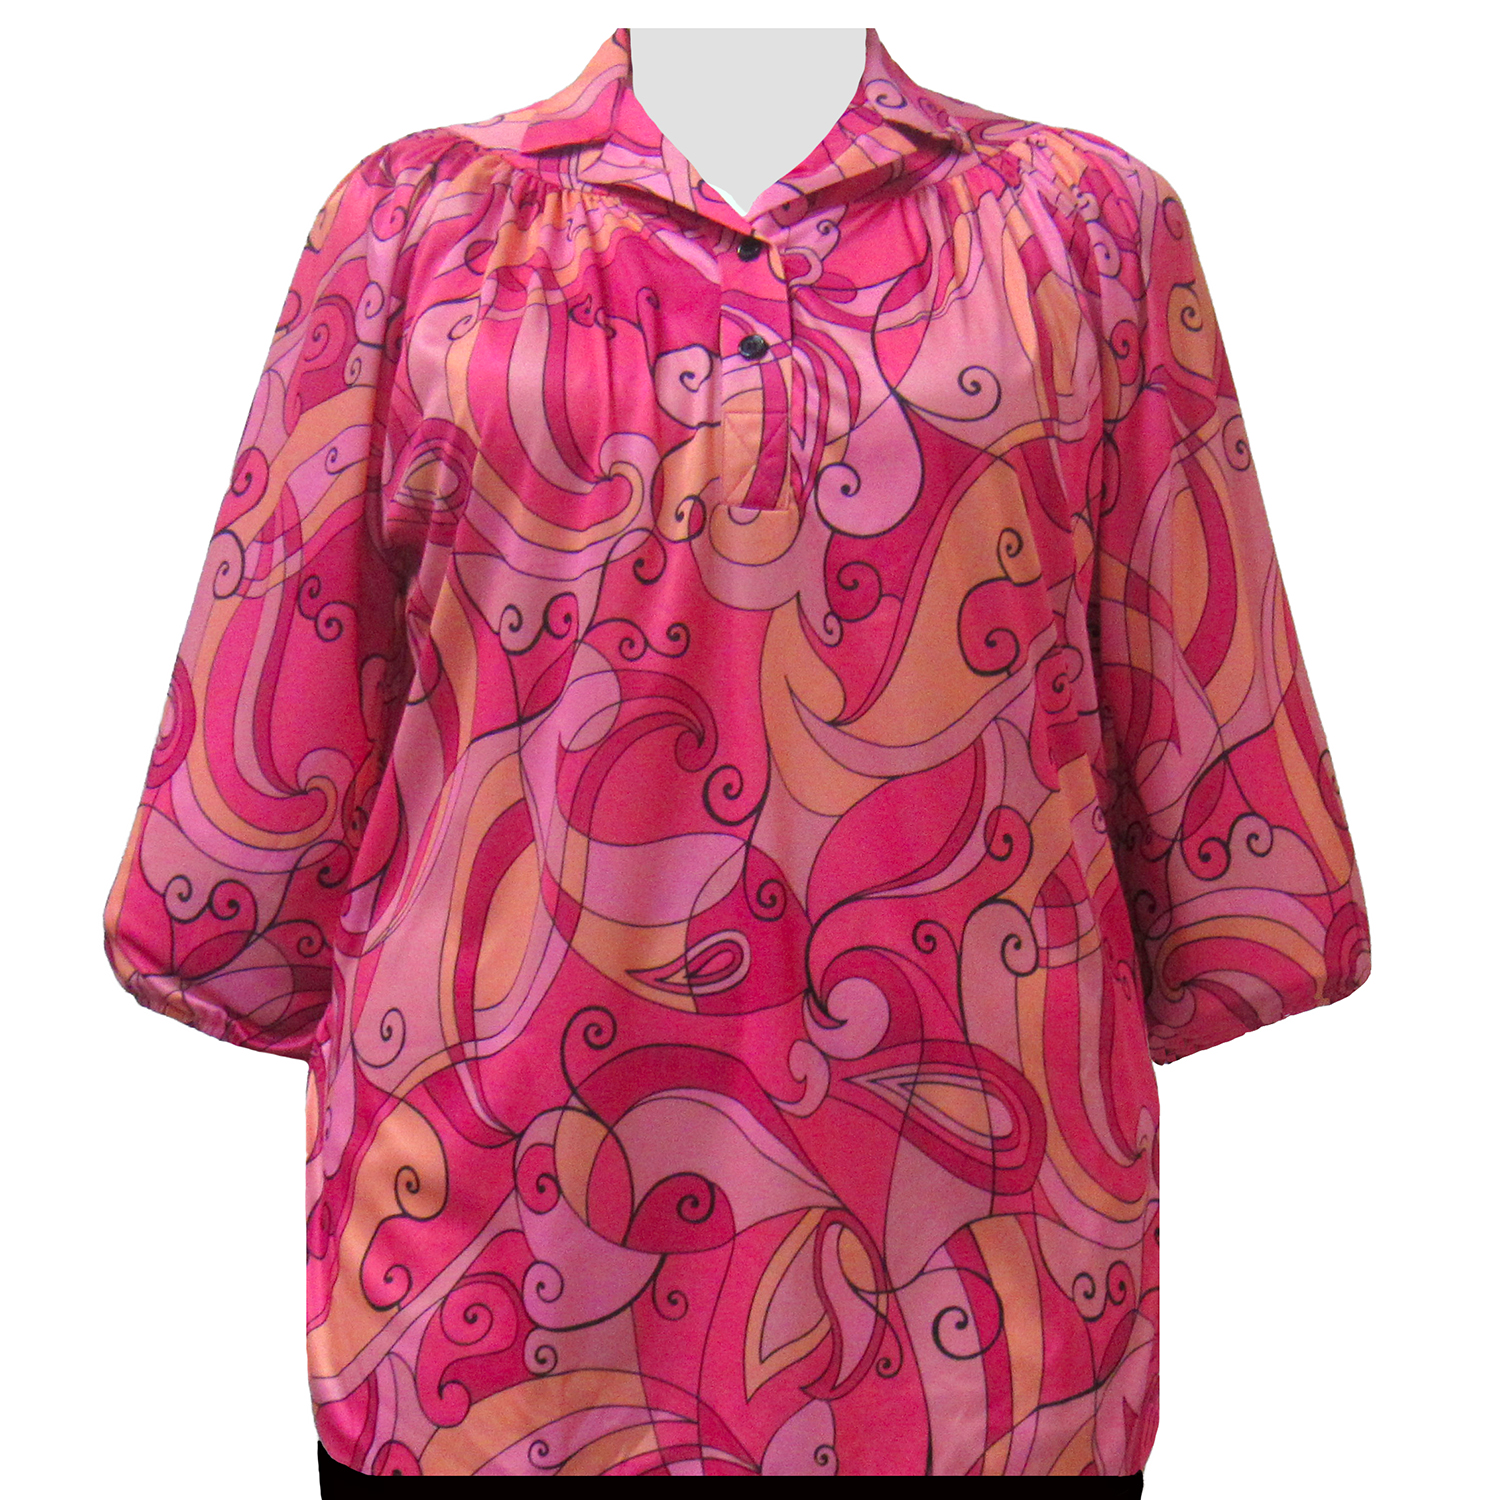 A Personal Touch Pink Scrolls Women's Plus Size Top